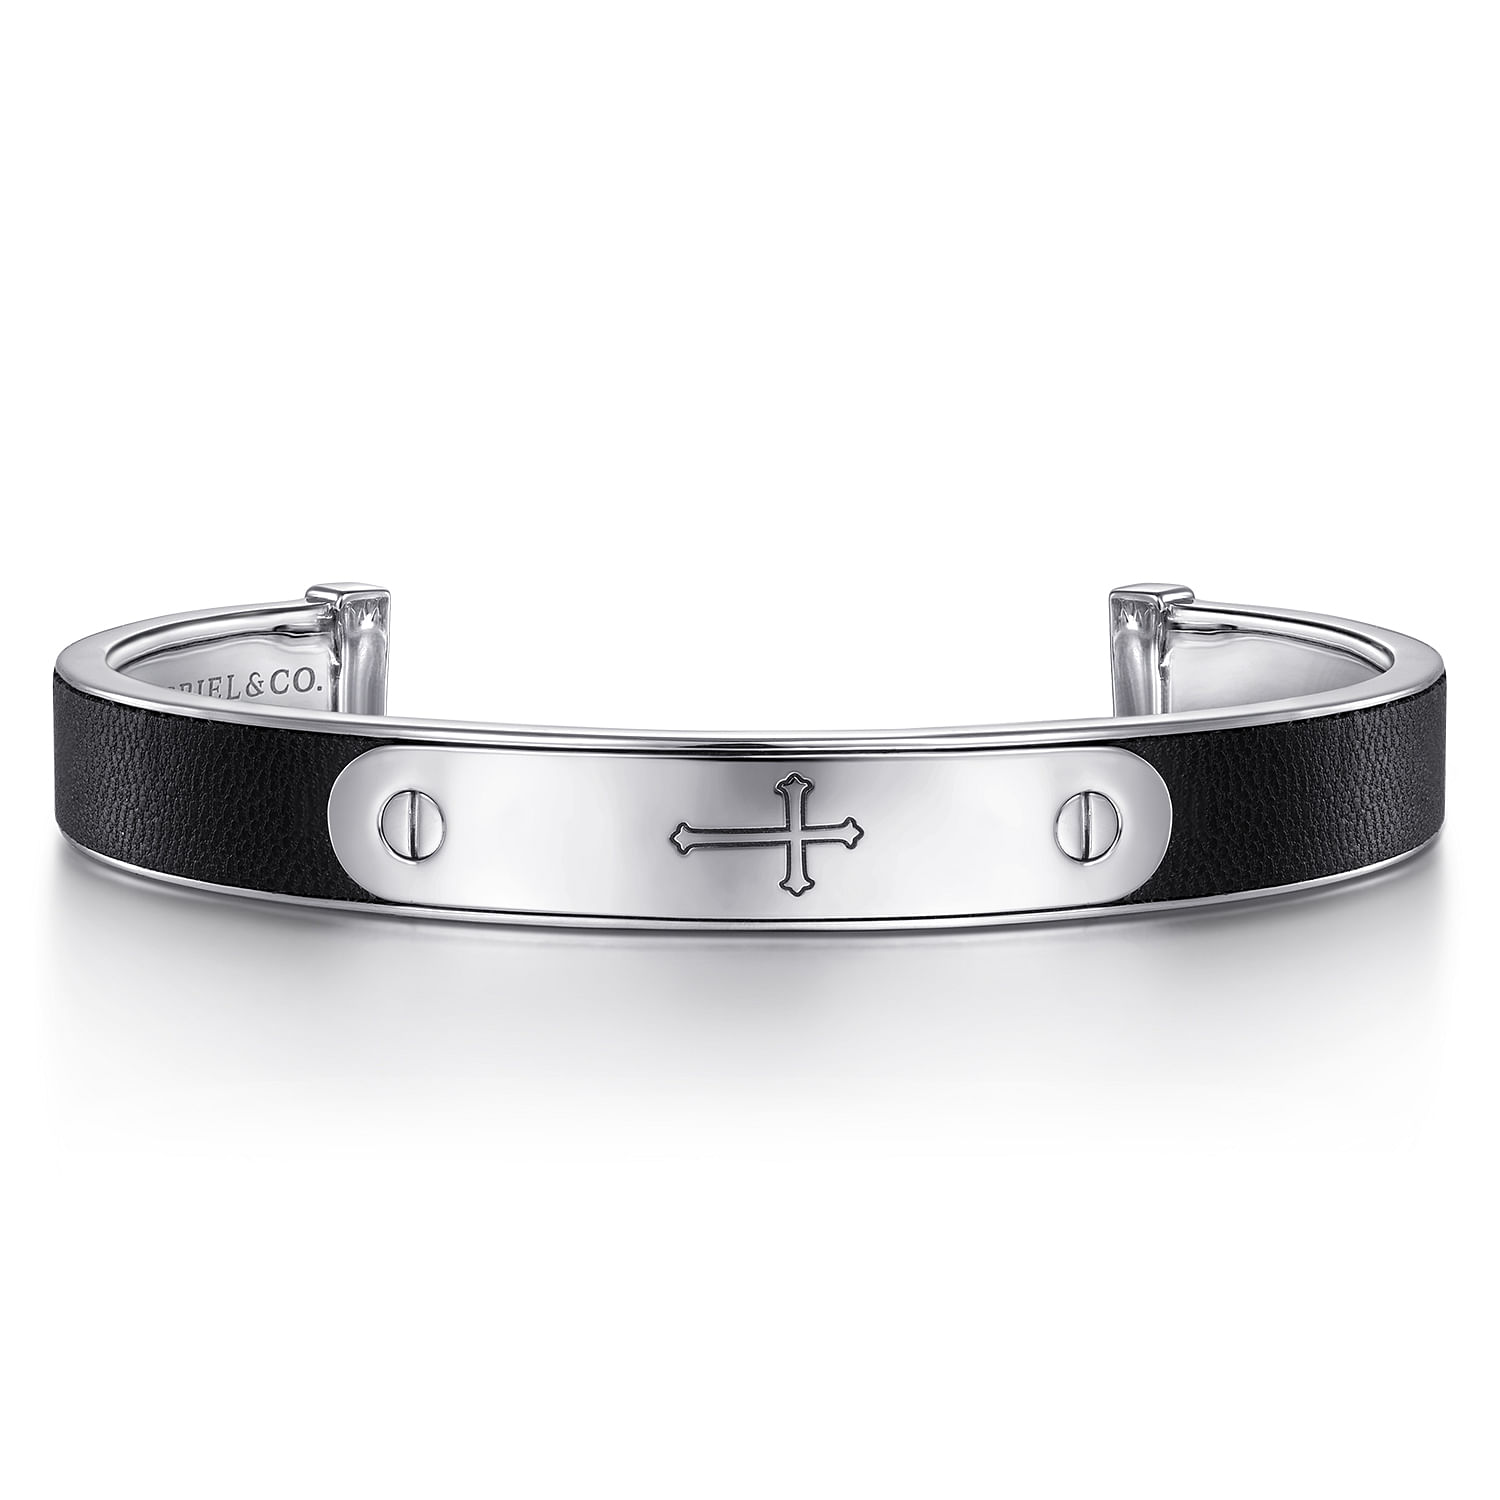 925 Sterling Silver and Leather Cross ID Cuff Bracelet